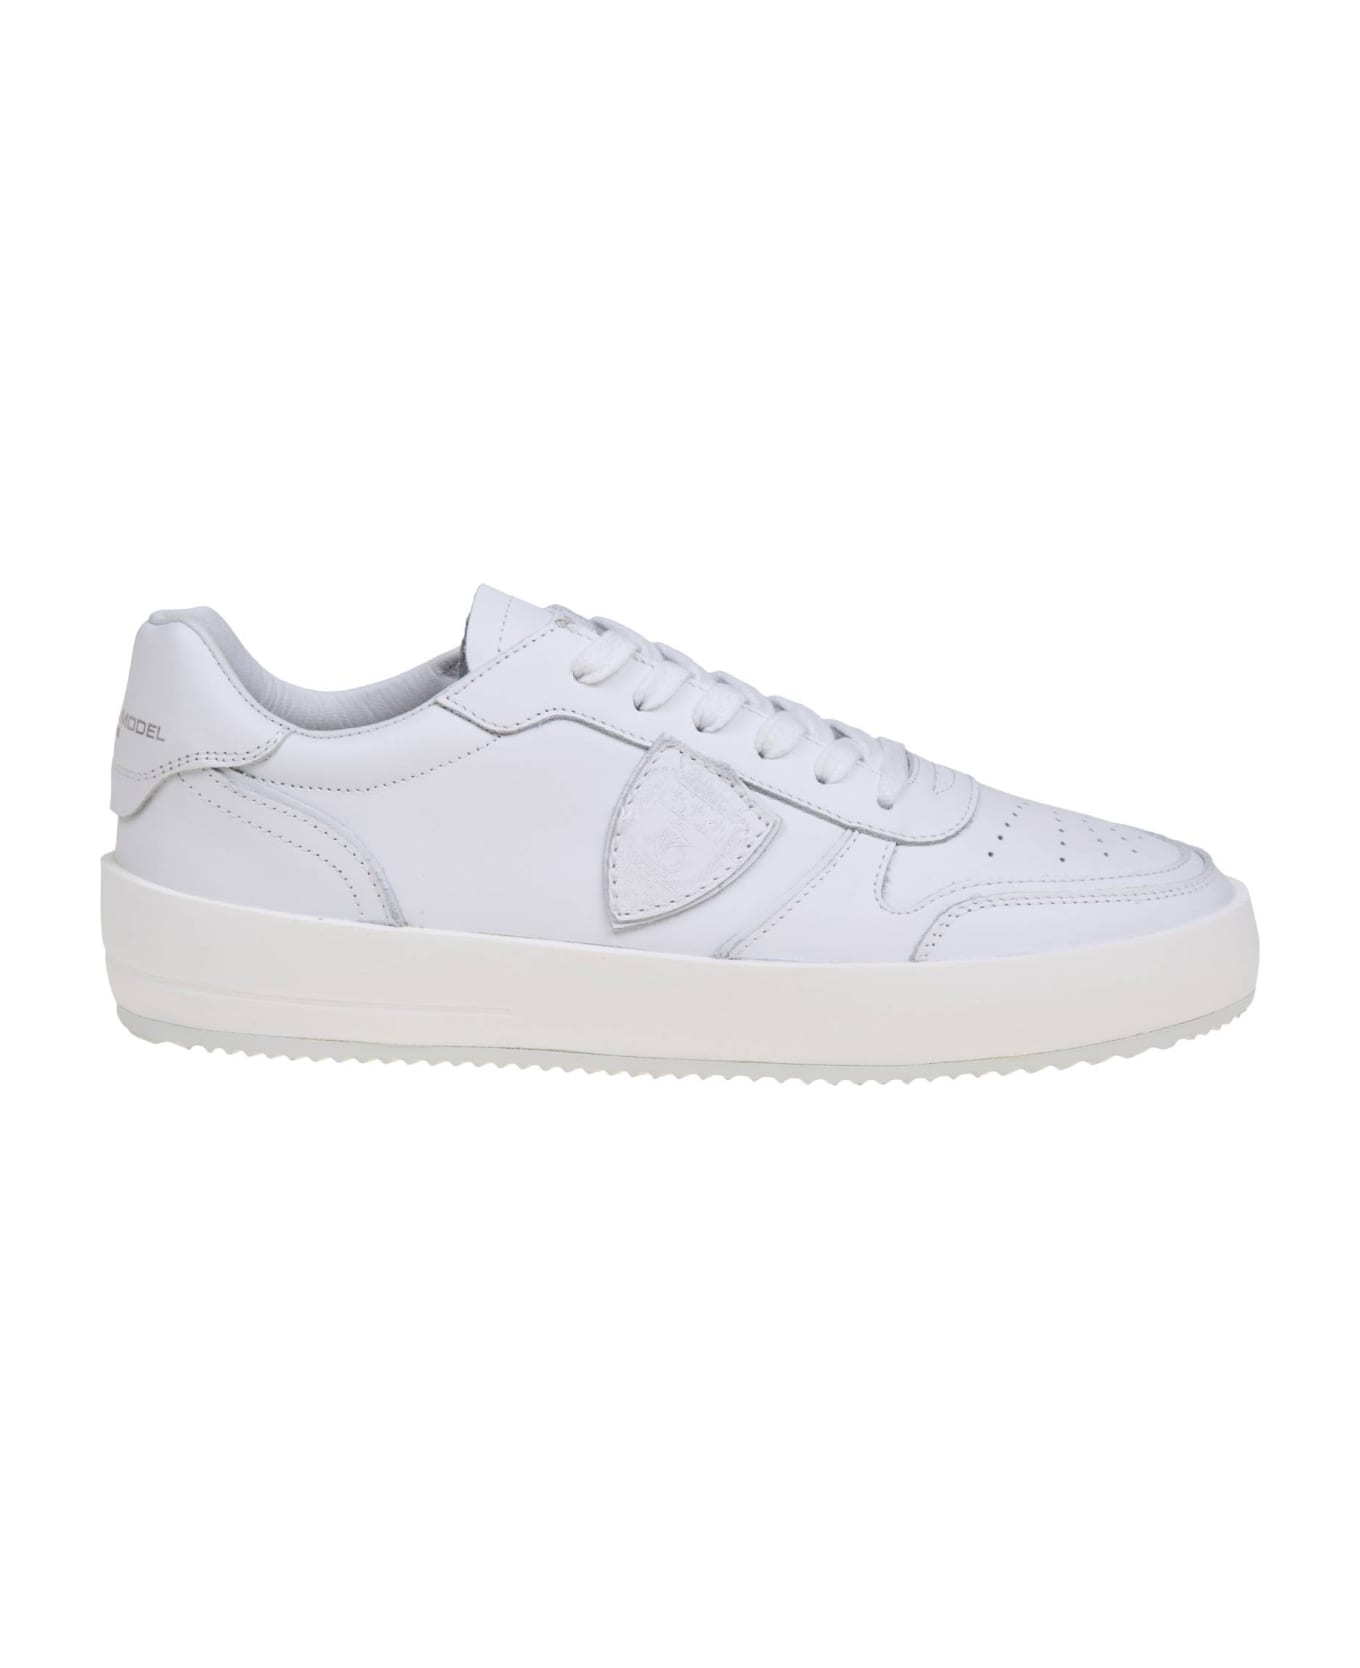 Philippe Model Nice Low White Leather Sneakers - WHITE